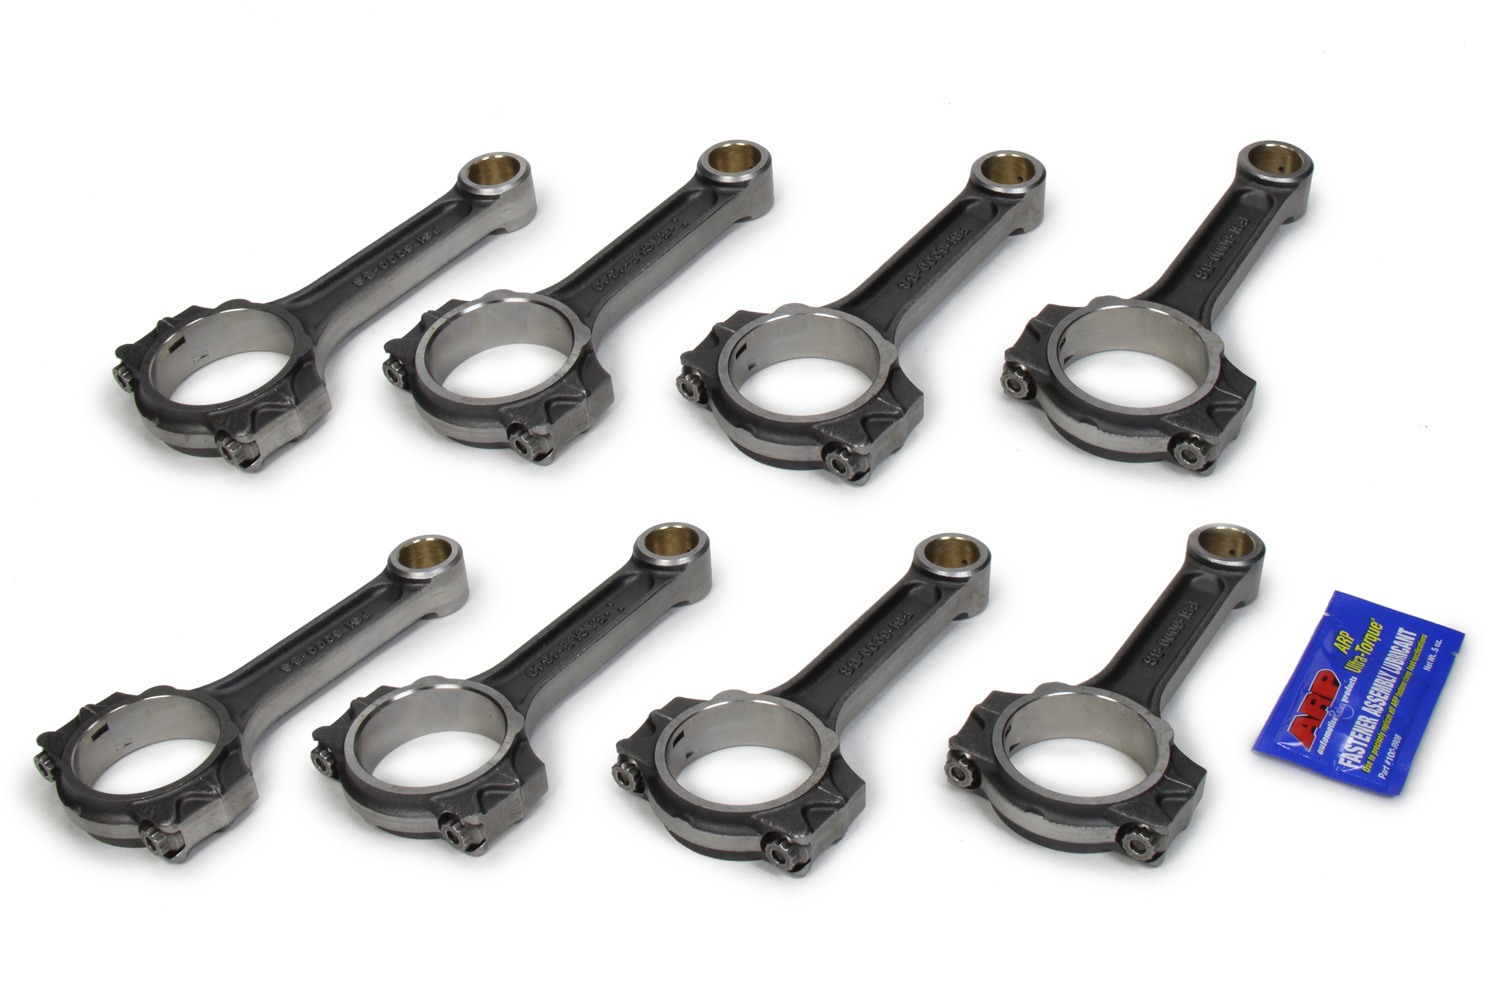 Eagle FSI6000B2000 - Connecting Rod, I Beam, 6.000 in Long, Bushed, 7/16 in Cap Screws, ARP2000, Forged Steel, Small Block Chevy, Set of 8